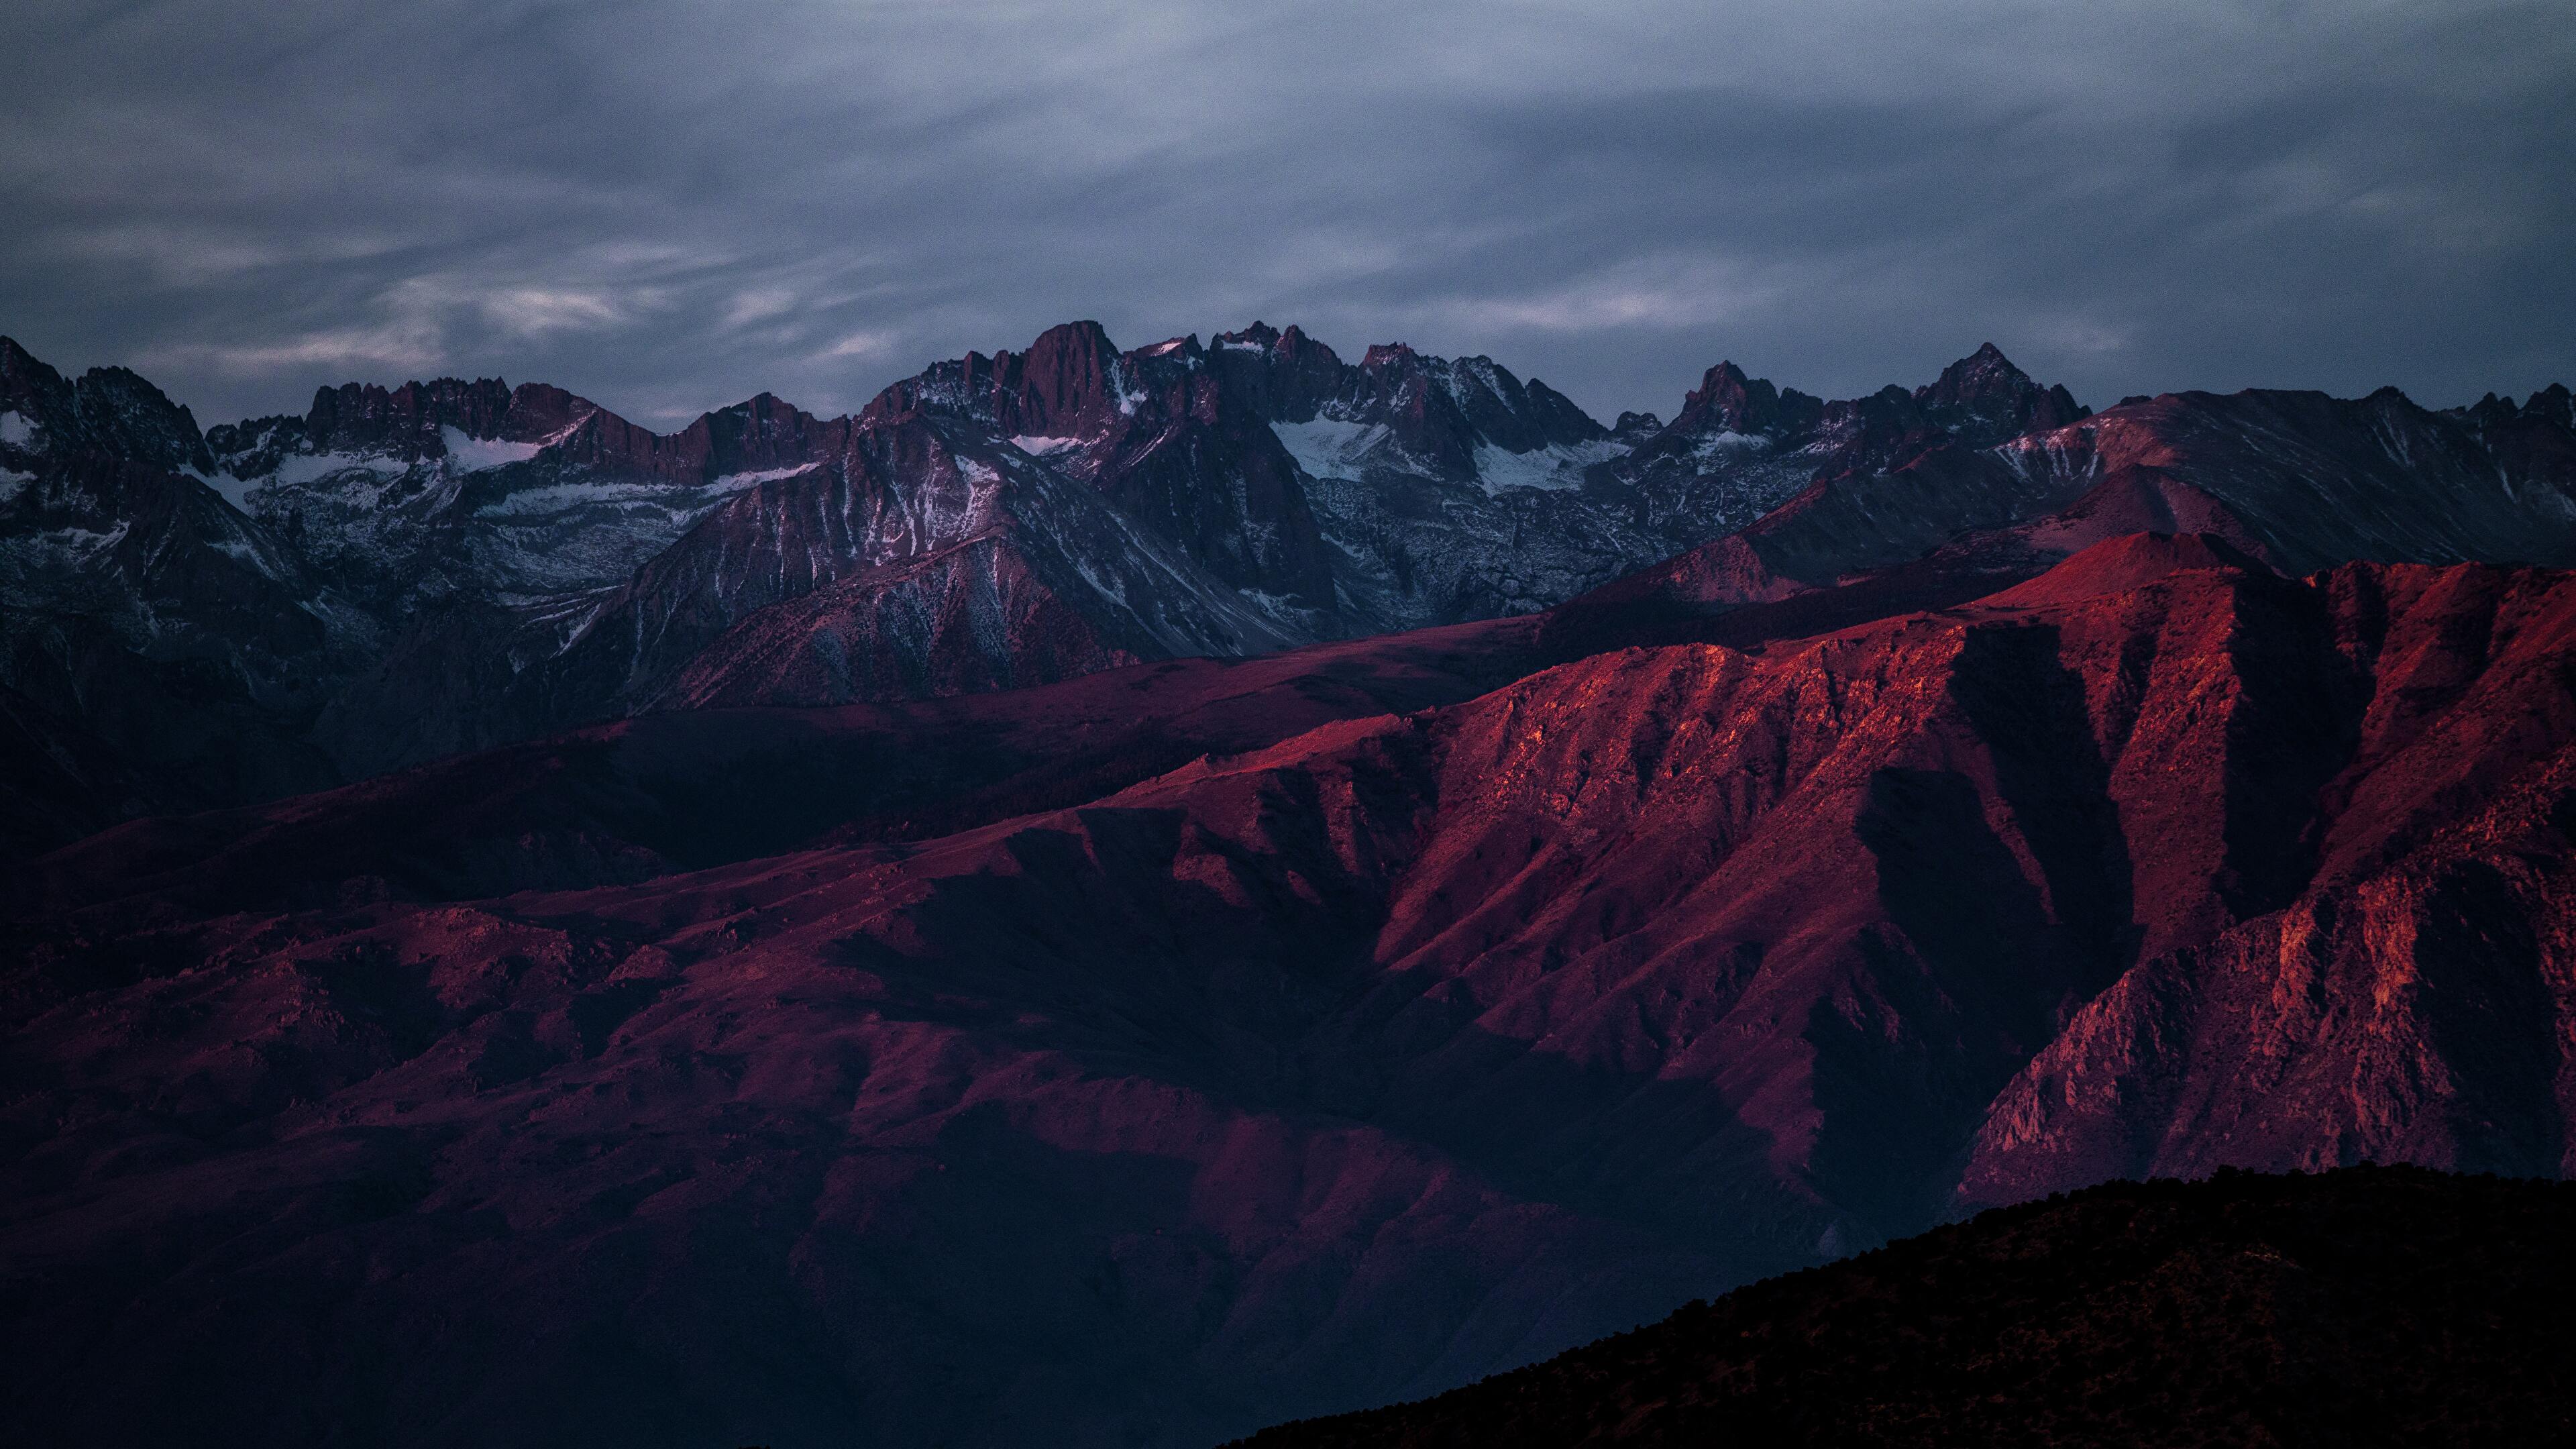 General 3840x2160 mountains nature landscape photography dark red reflection